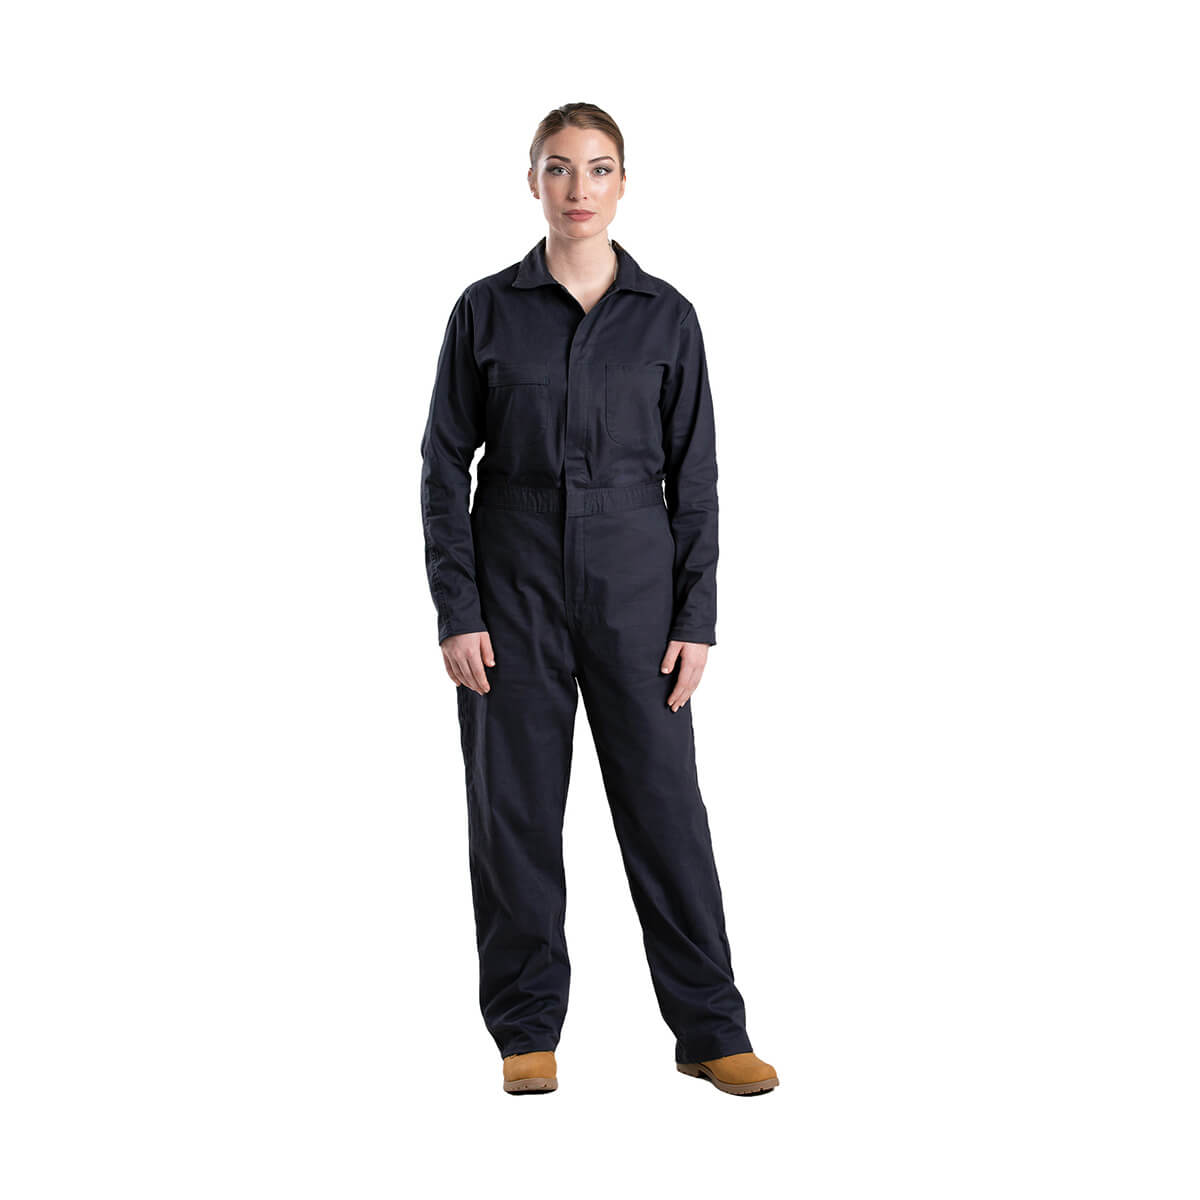 Berne Women's Highland Cotton Unlined Overall - Navy